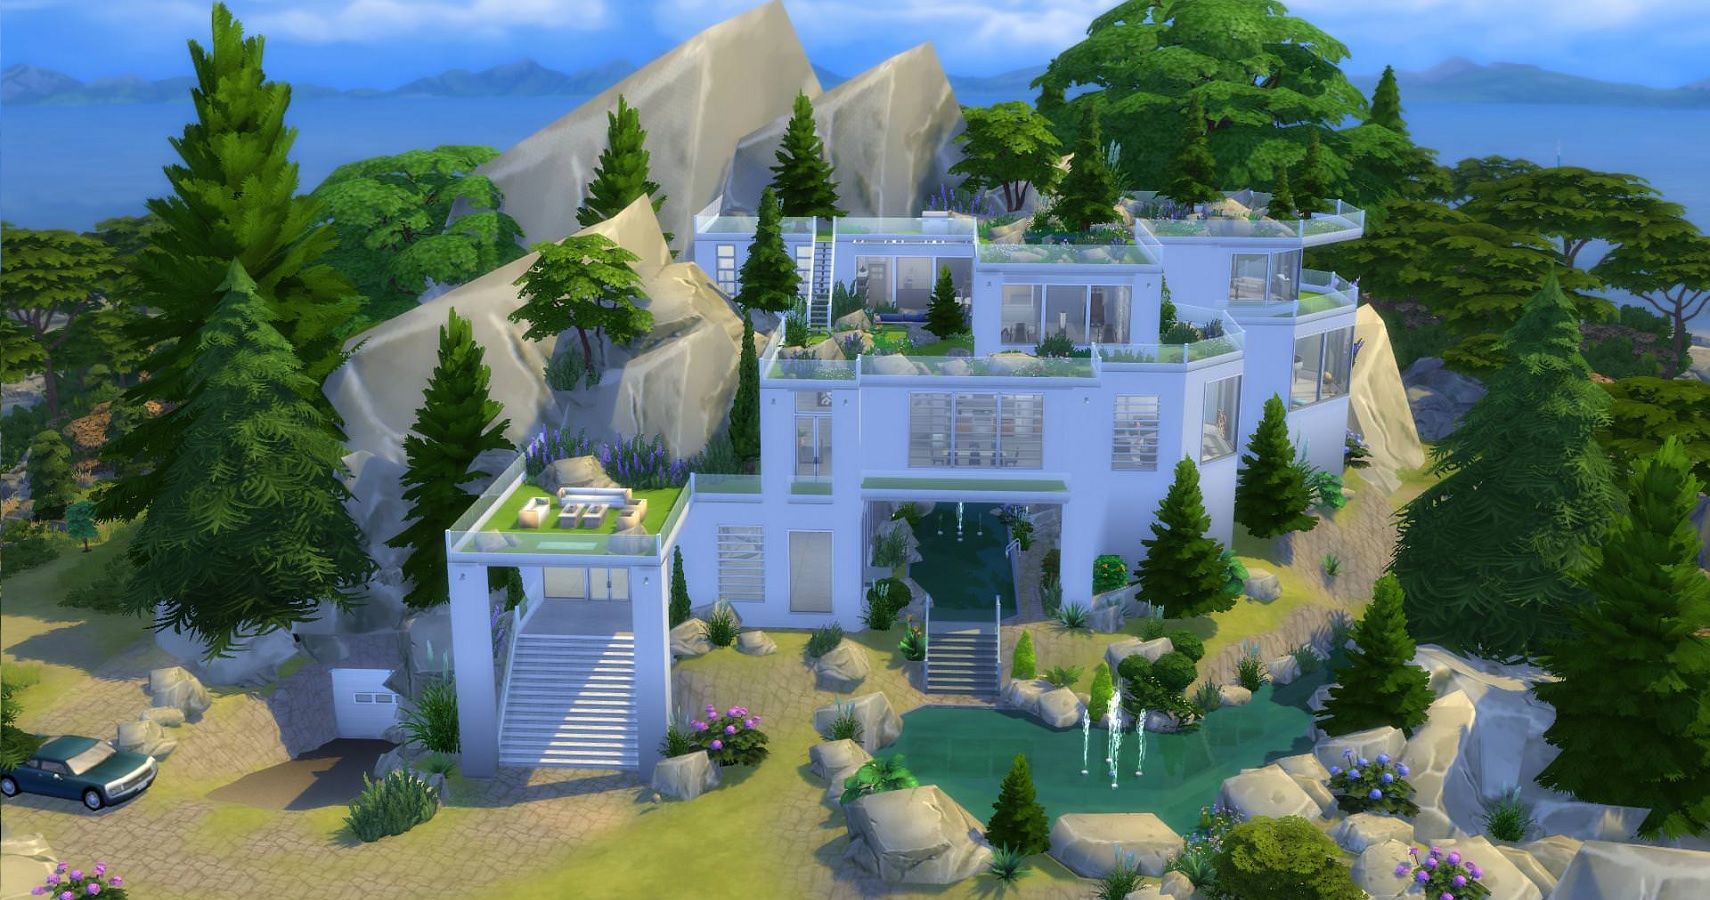 10 The Sims 4 Mansions That Are Too Unreal | Game Rant